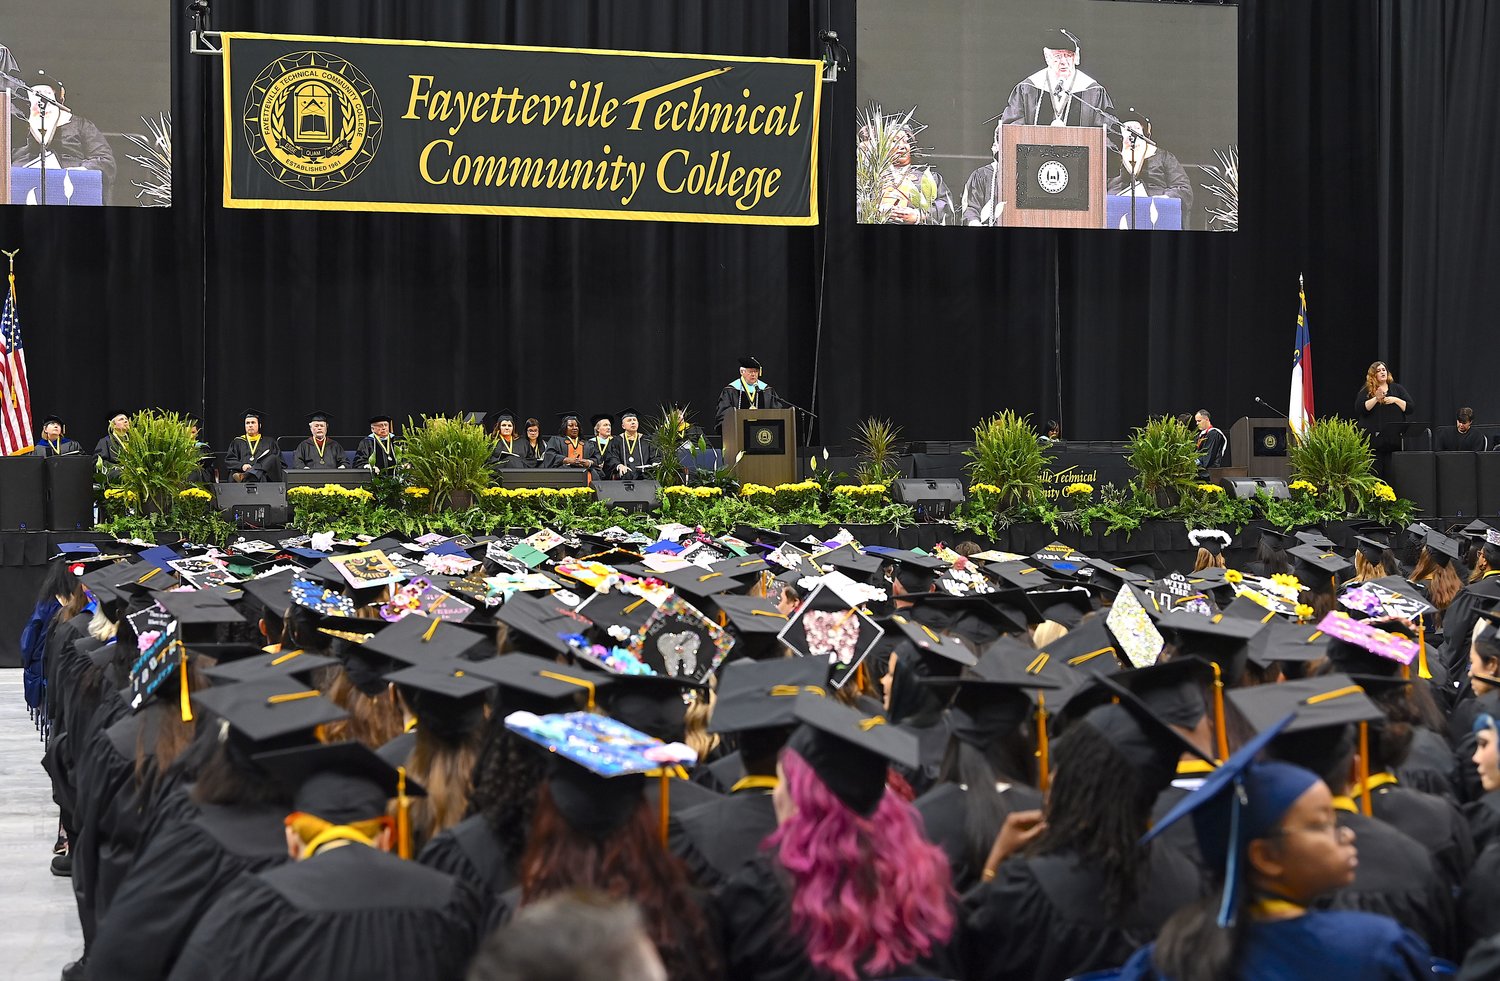 Fayetteville Technical Community College celebrated its 60th annual commencement exercises on May 13 at the Crown Coliseum.